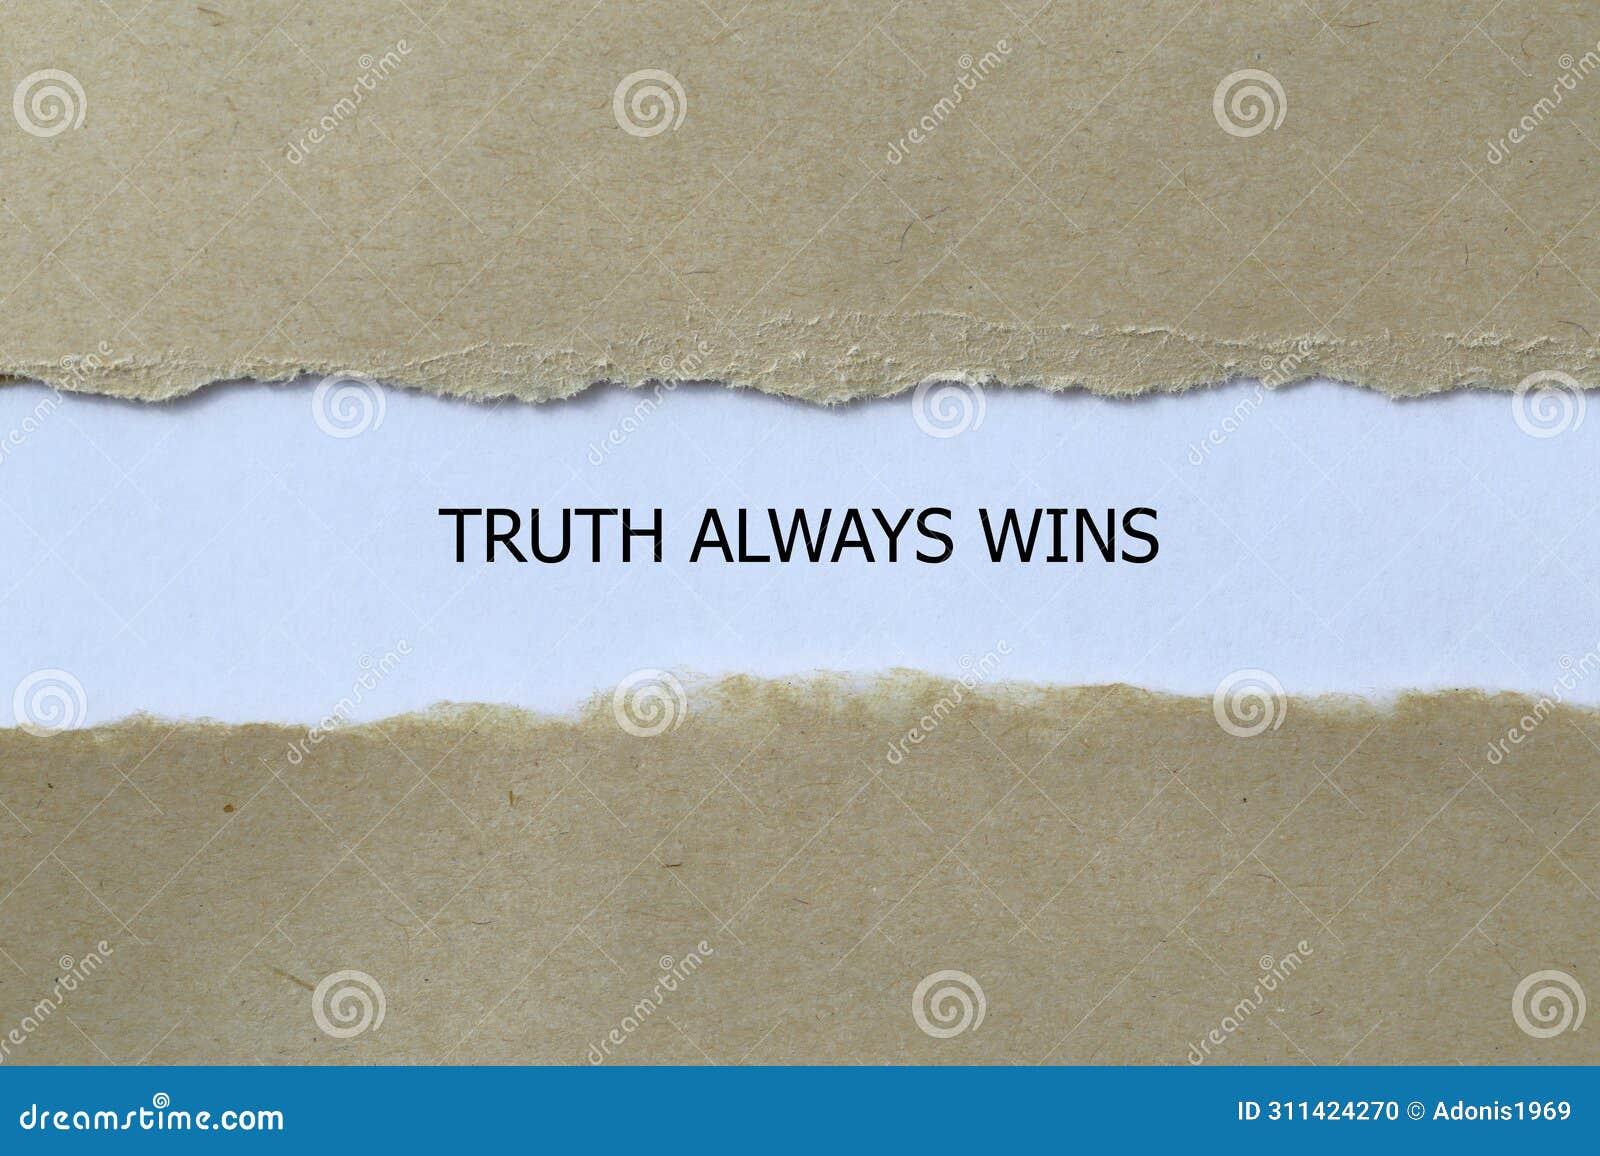 truth always wins on white paper